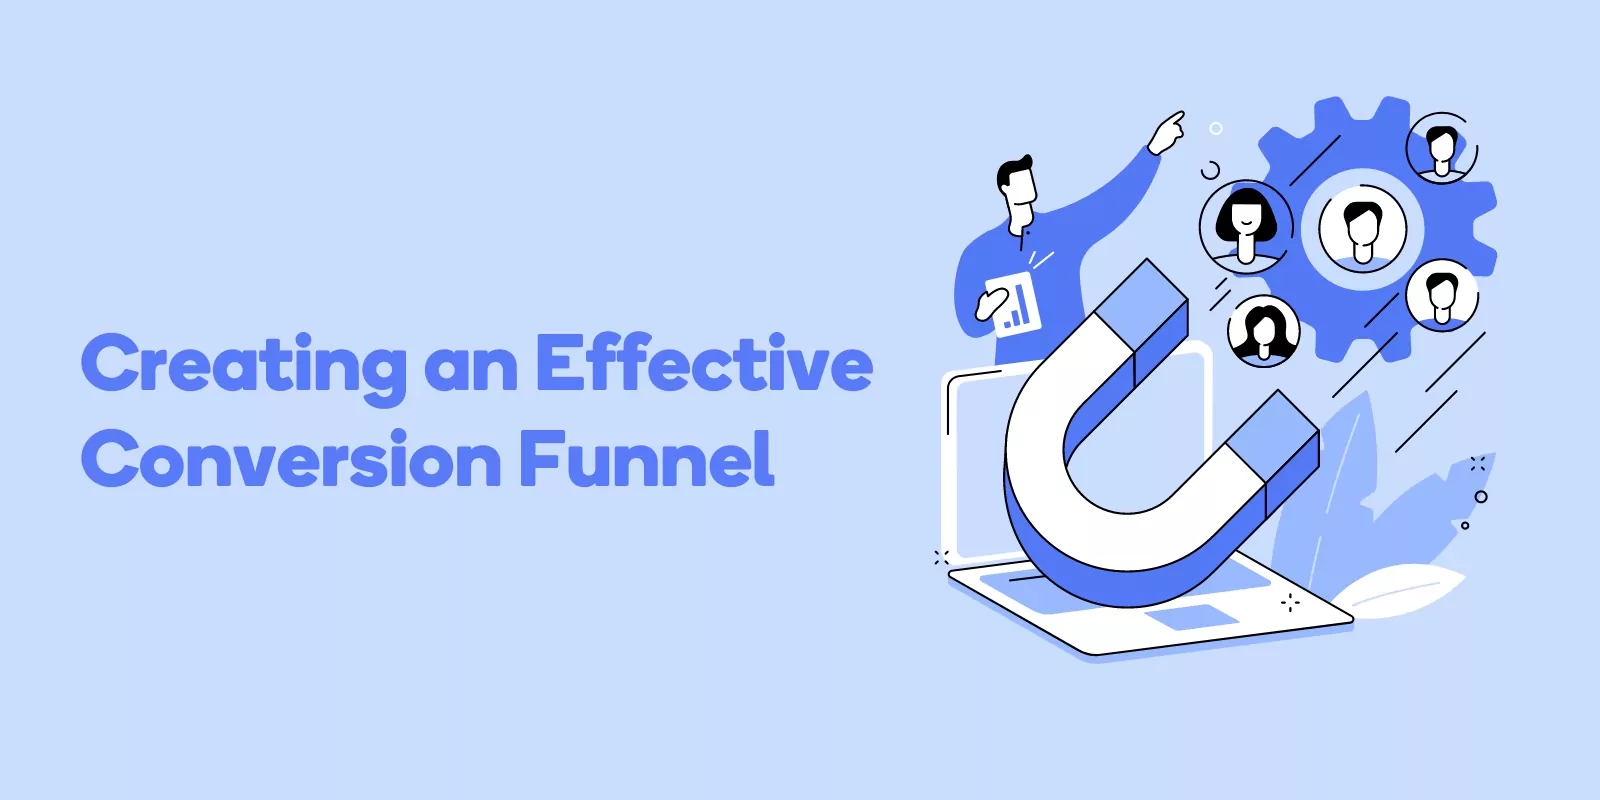 Creating an Effective Conversion Funnel